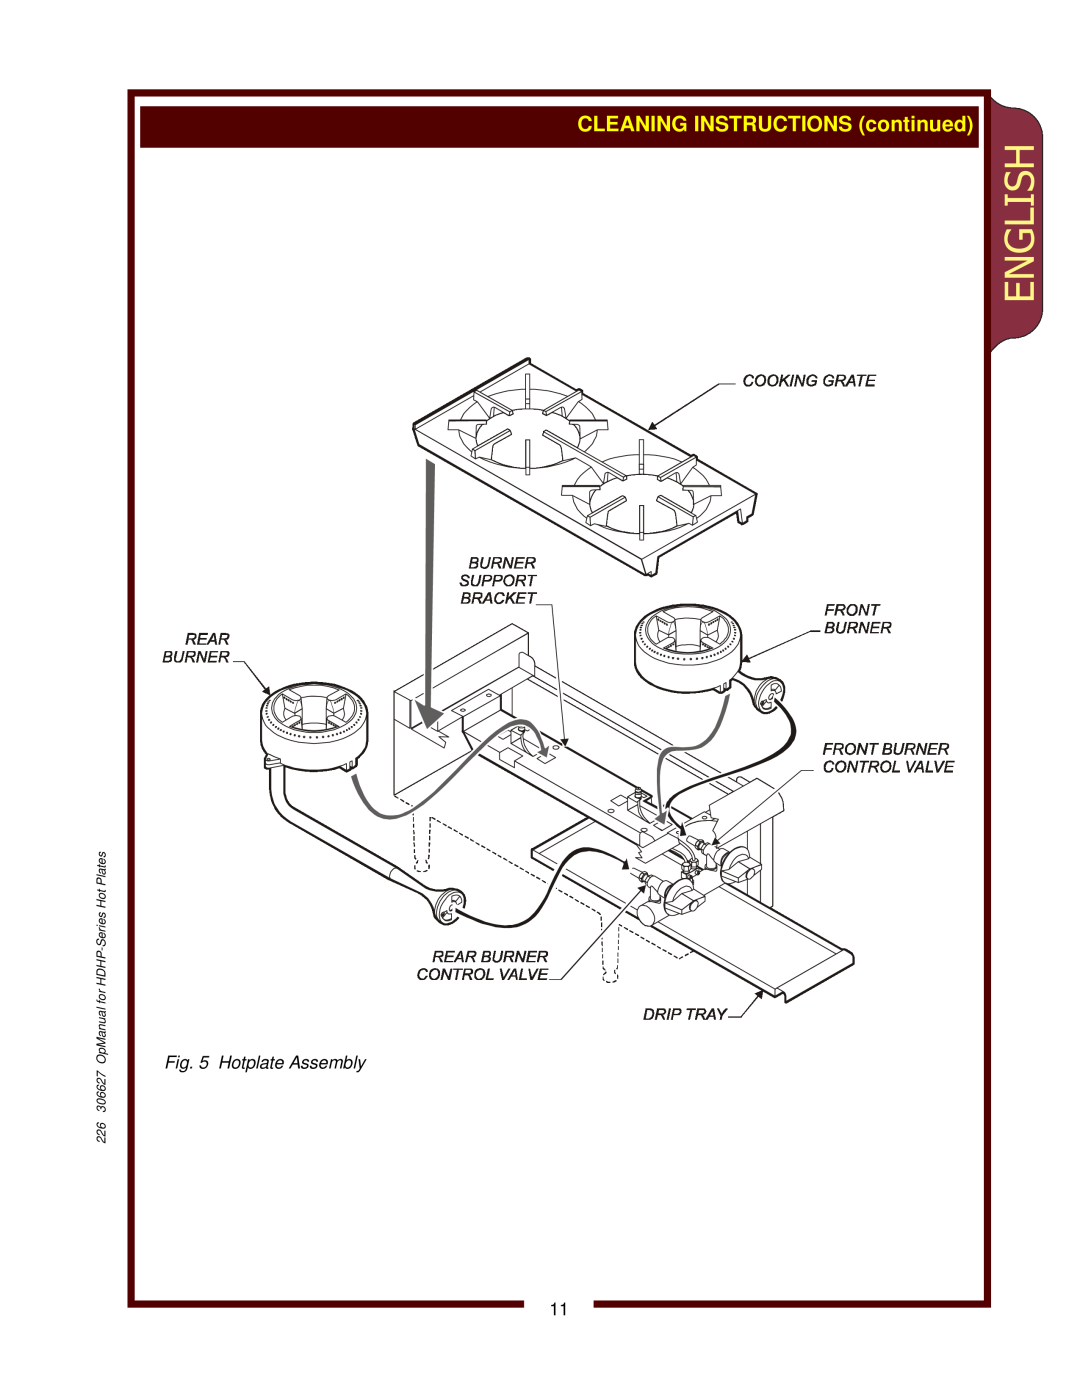 Wells HDHP-1230G, HDHP-3630G, HDHP2430G operation manual CLEANING INSTRUCTIONS continued, English, Hotplate Assembly 